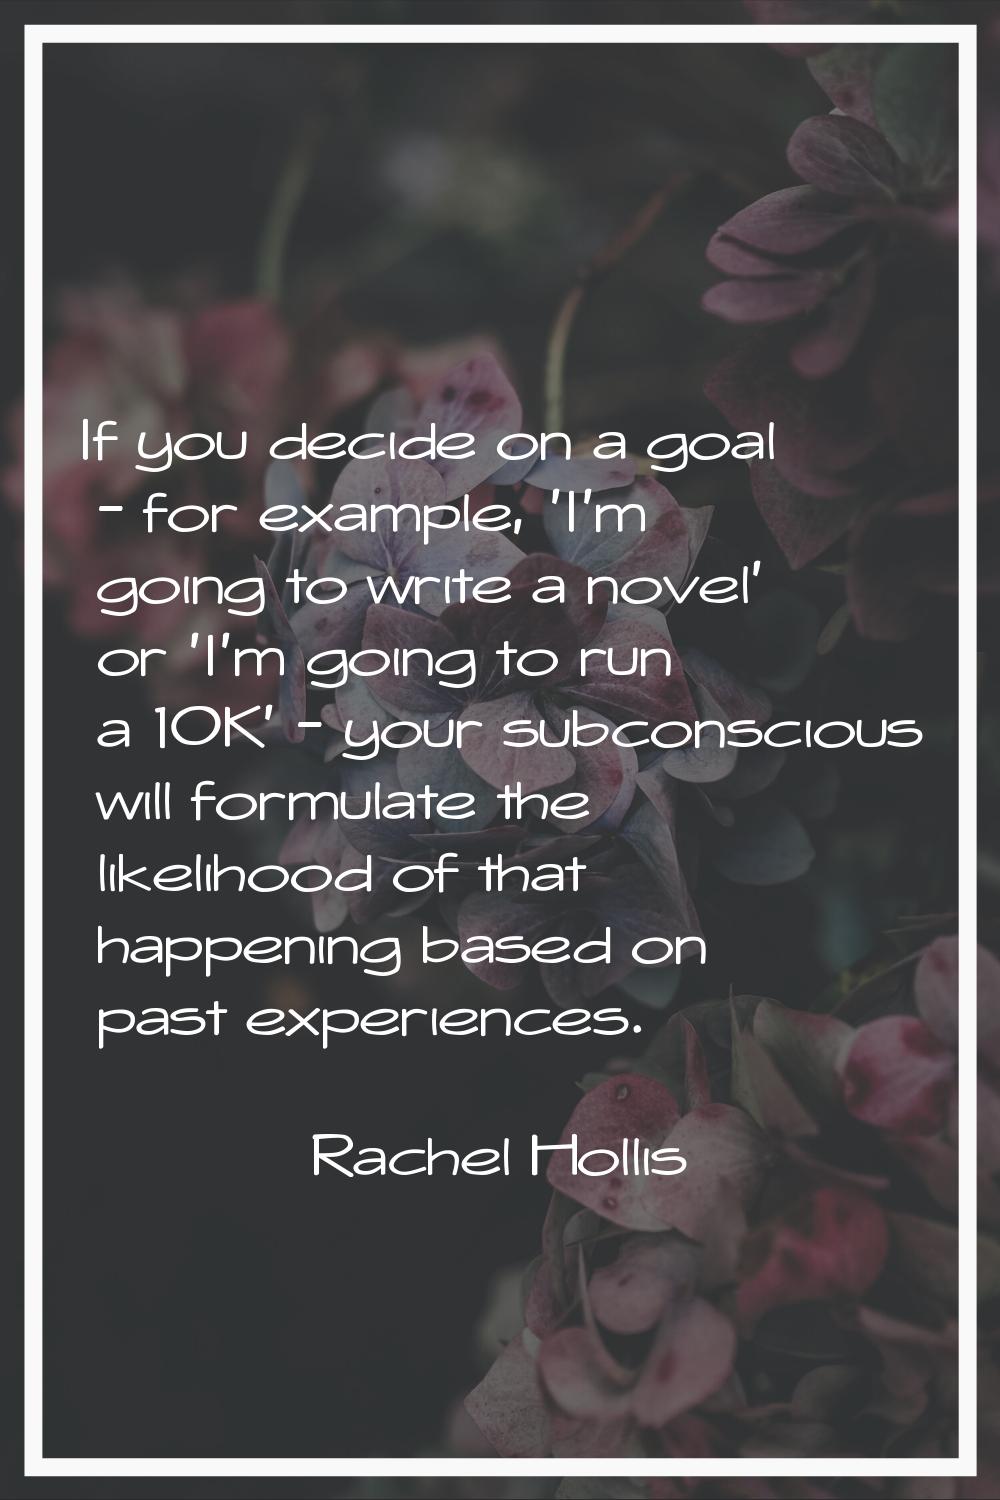 If you decide on a goal - for example, 'I'm going to write a novel' or 'I'm going to run a 10K' - y